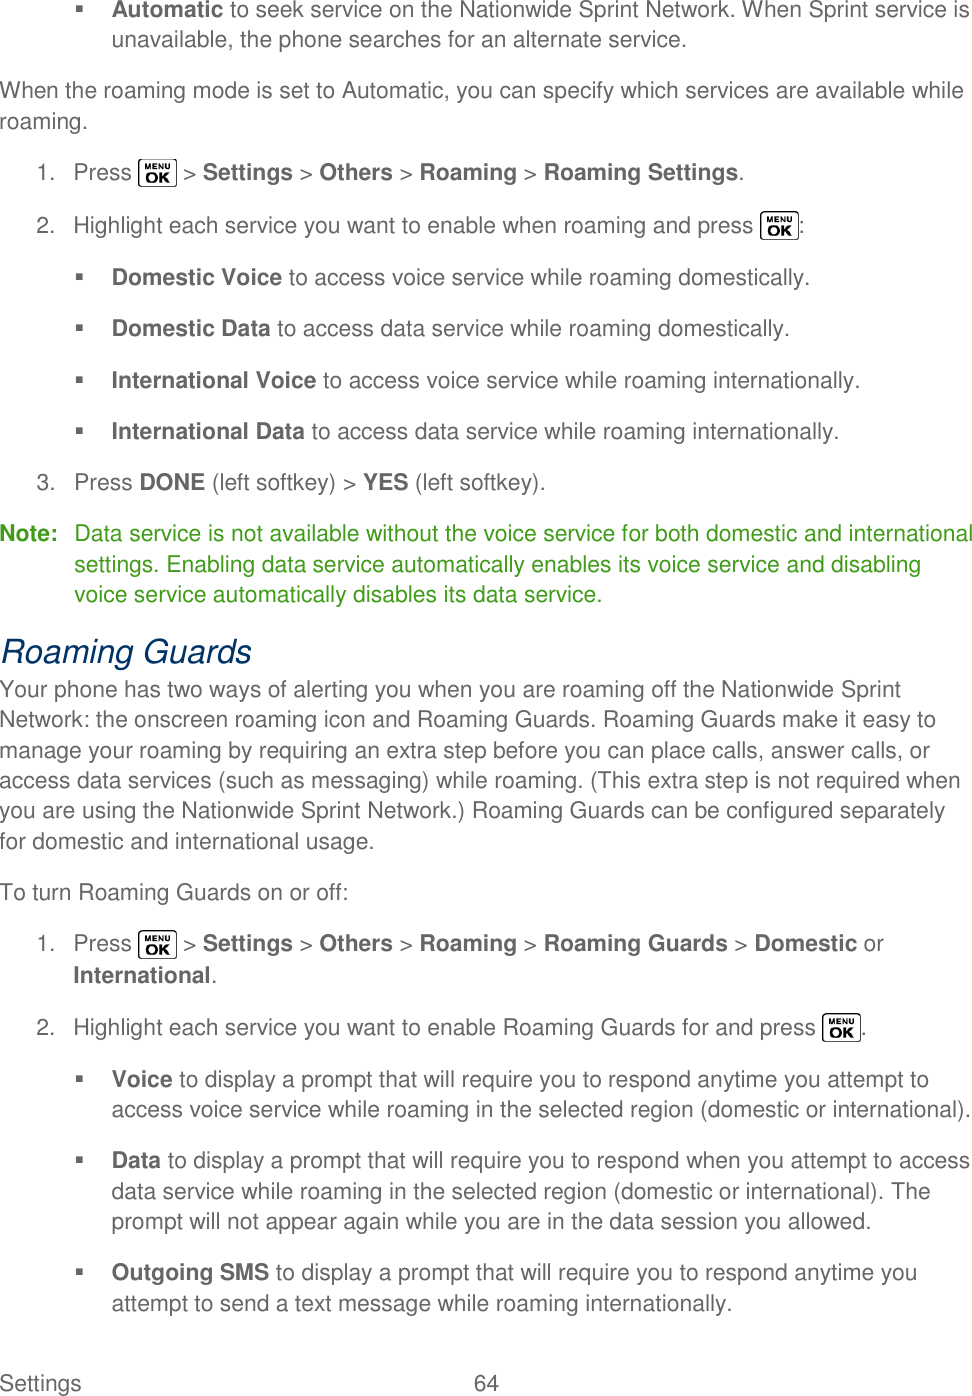  Settings  64    Automatic to seek service on the Nationwide Sprint Network. When Sprint service is unavailable, the phone searches for an alternate service. When the roaming mode is set to Automatic, you can specify which services are available while roaming. 1.  Press   &gt; Settings &gt; Others &gt; Roaming &gt; Roaming Settings. 2.  Highlight each service you want to enable when roaming and press  :  Domestic Voice to access voice service while roaming domestically.  Domestic Data to access data service while roaming domestically.  International Voice to access voice service while roaming internationally.  International Data to access data service while roaming internationally. 3.  Press DONE (left softkey) &gt; YES (left softkey). Note:  Data service is not available without the voice service for both domestic and international settings. Enabling data service automatically enables its voice service and disabling voice service automatically disables its data service. Roaming Guards Your phone has two ways of alerting you when you are roaming off the Nationwide Sprint Network: the onscreen roaming icon and Roaming Guards. Roaming Guards make it easy to manage your roaming by requiring an extra step before you can place calls, answer calls, or access data services (such as messaging) while roaming. (This extra step is not required when you are using the Nationwide Sprint Network.) Roaming Guards can be configured separately for domestic and international usage. To turn Roaming Guards on or off: 1.  Press   &gt; Settings &gt; Others &gt; Roaming &gt; Roaming Guards &gt; Domestic or International. 2.  Highlight each service you want to enable Roaming Guards for and press  .  Voice to display a prompt that will require you to respond anytime you attempt to access voice service while roaming in the selected region (domestic or international).  Data to display a prompt that will require you to respond when you attempt to access data service while roaming in the selected region (domestic or international). The prompt will not appear again while you are in the data session you allowed.  Outgoing SMS to display a prompt that will require you to respond anytime you attempt to send a text message while roaming internationally. 